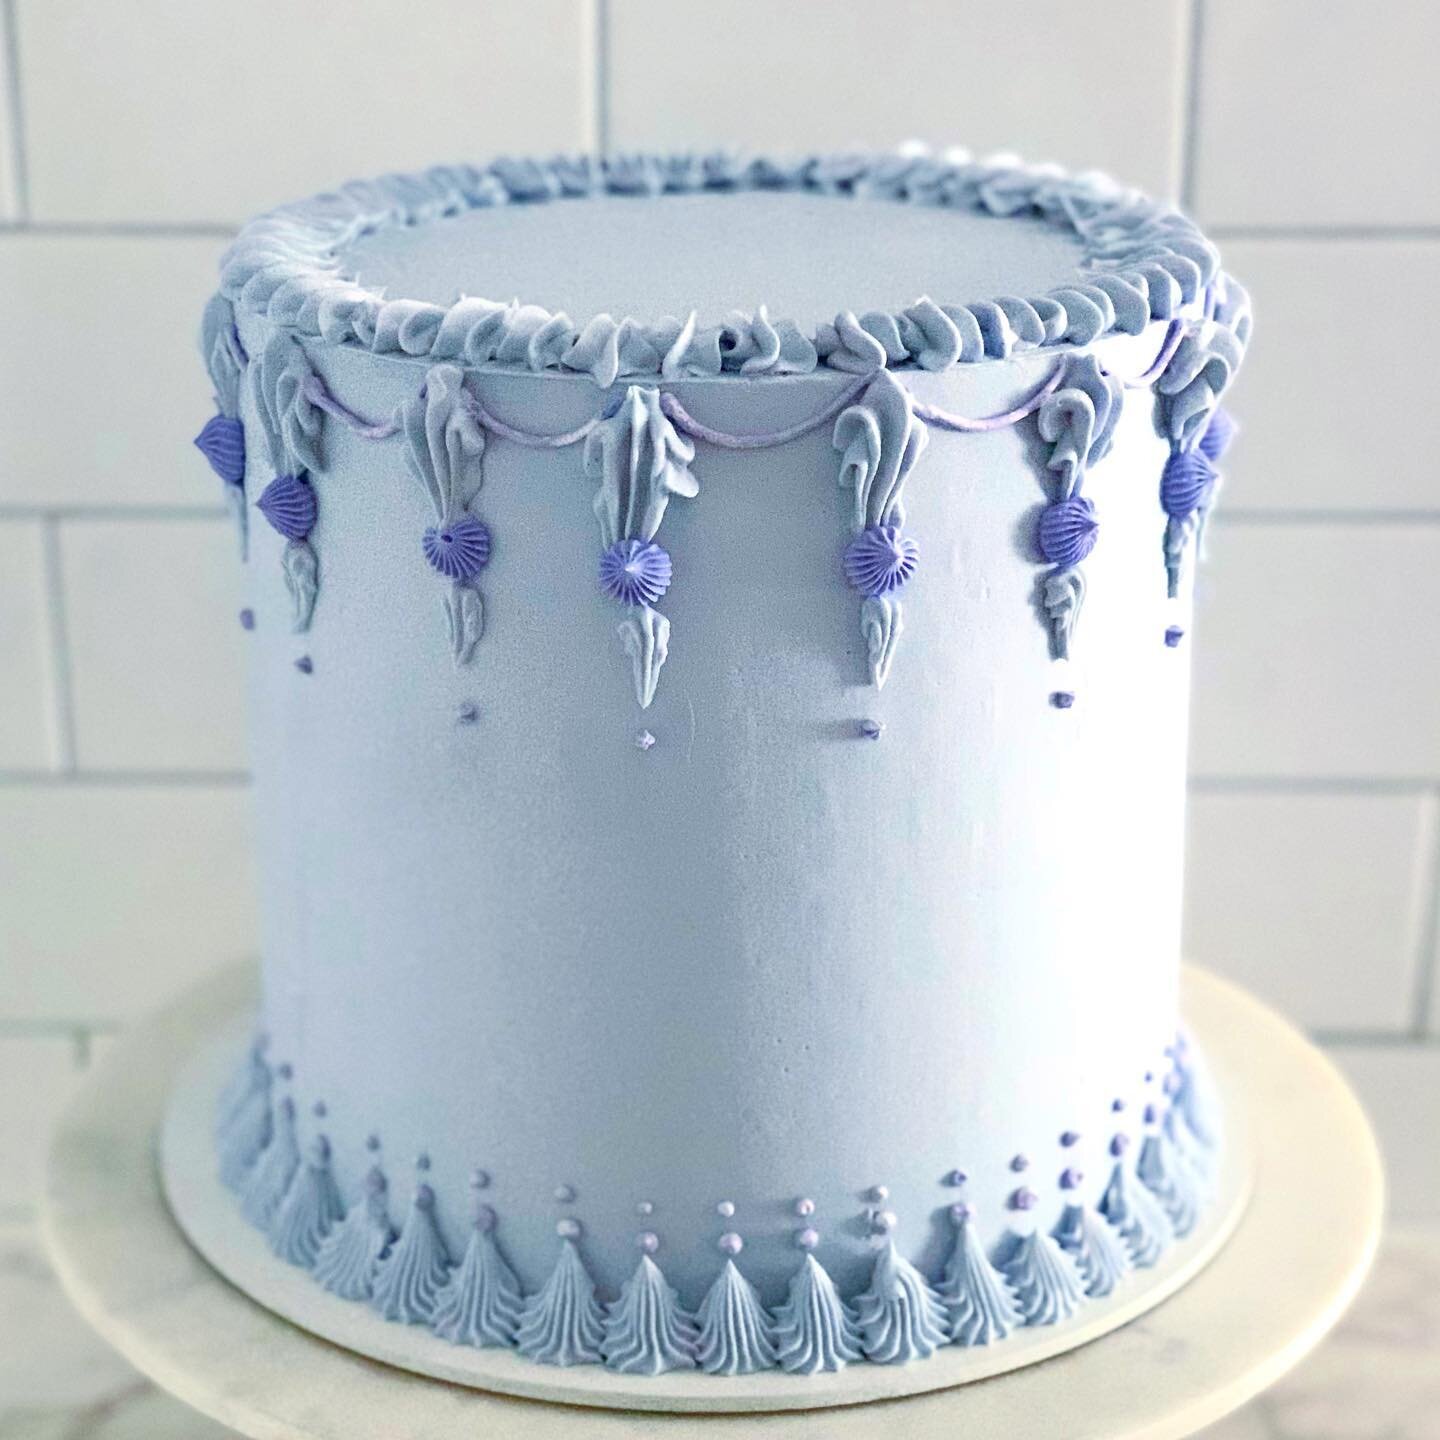 An extra tall cake for a Frozen-themed birthday ❄️

Inside is almond cake with vanilla buttercream